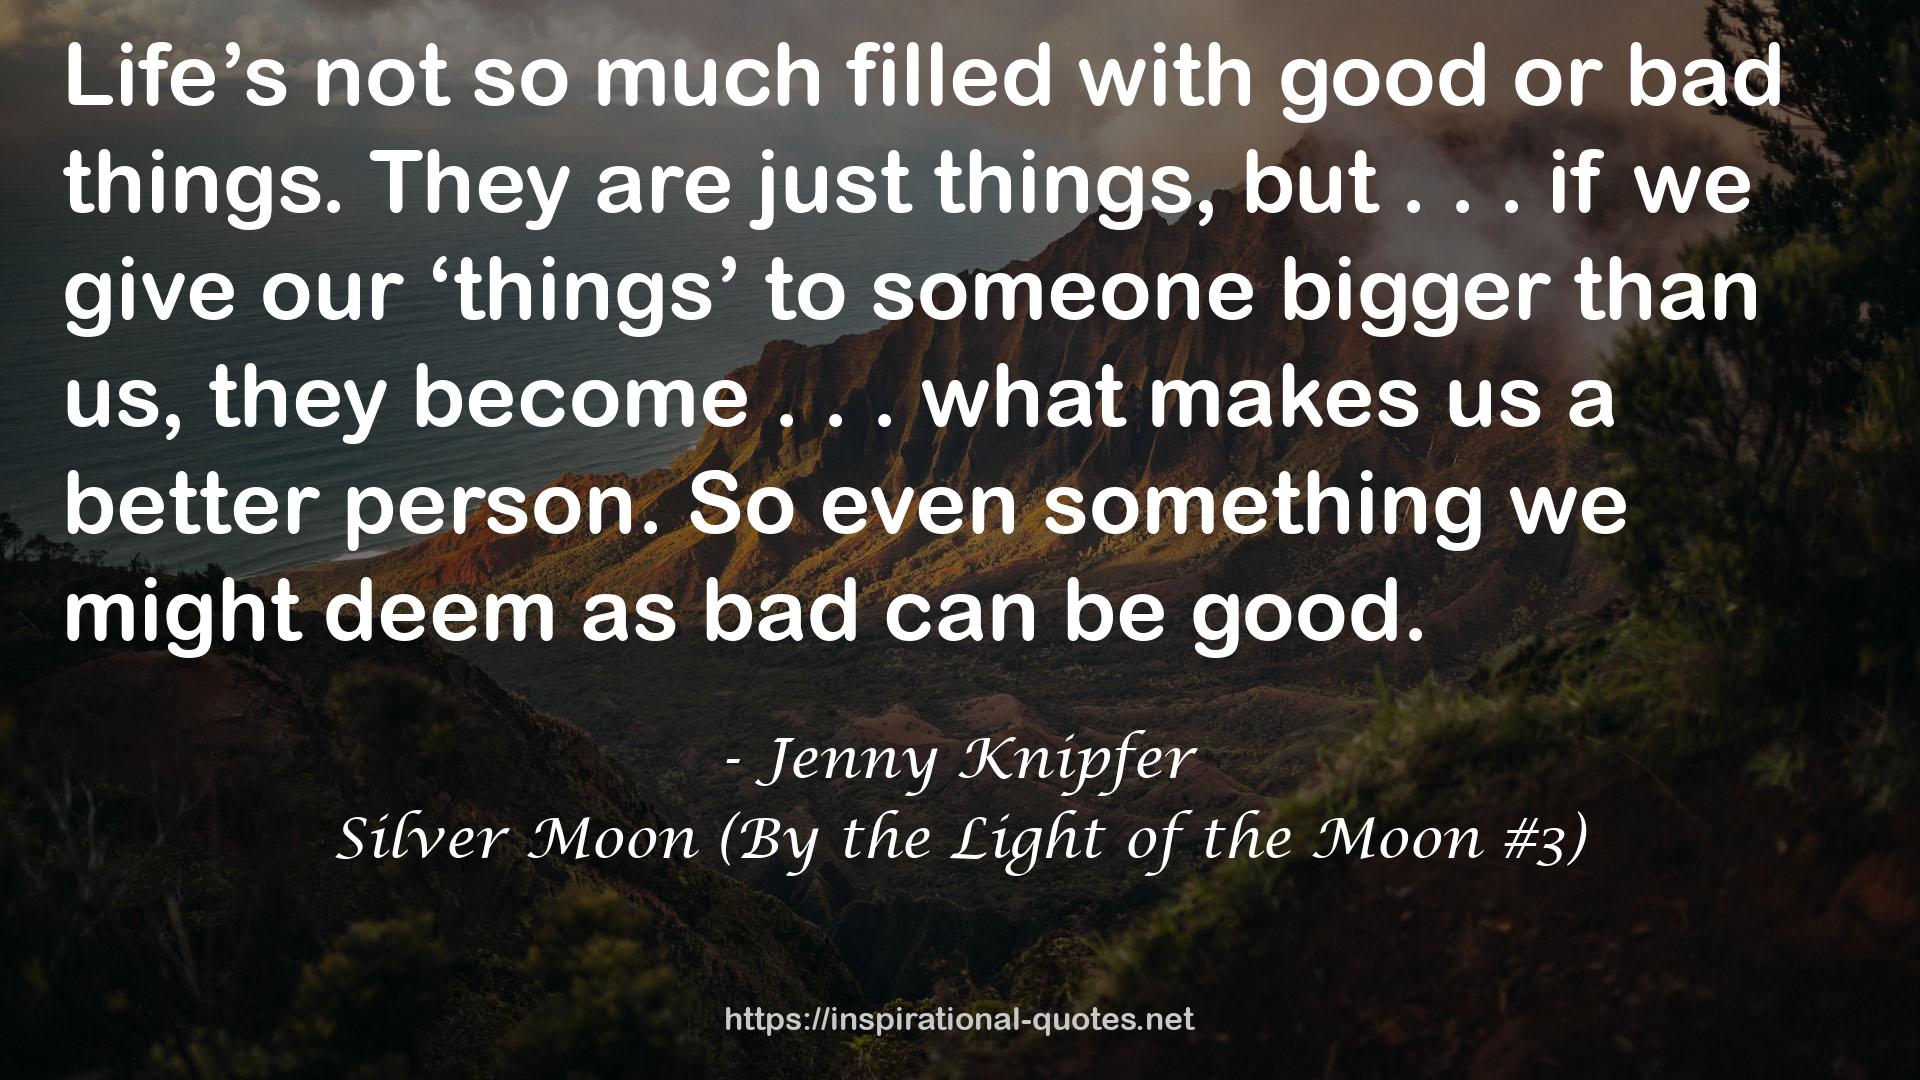 Silver Moon (By the Light of the Moon #3) QUOTES